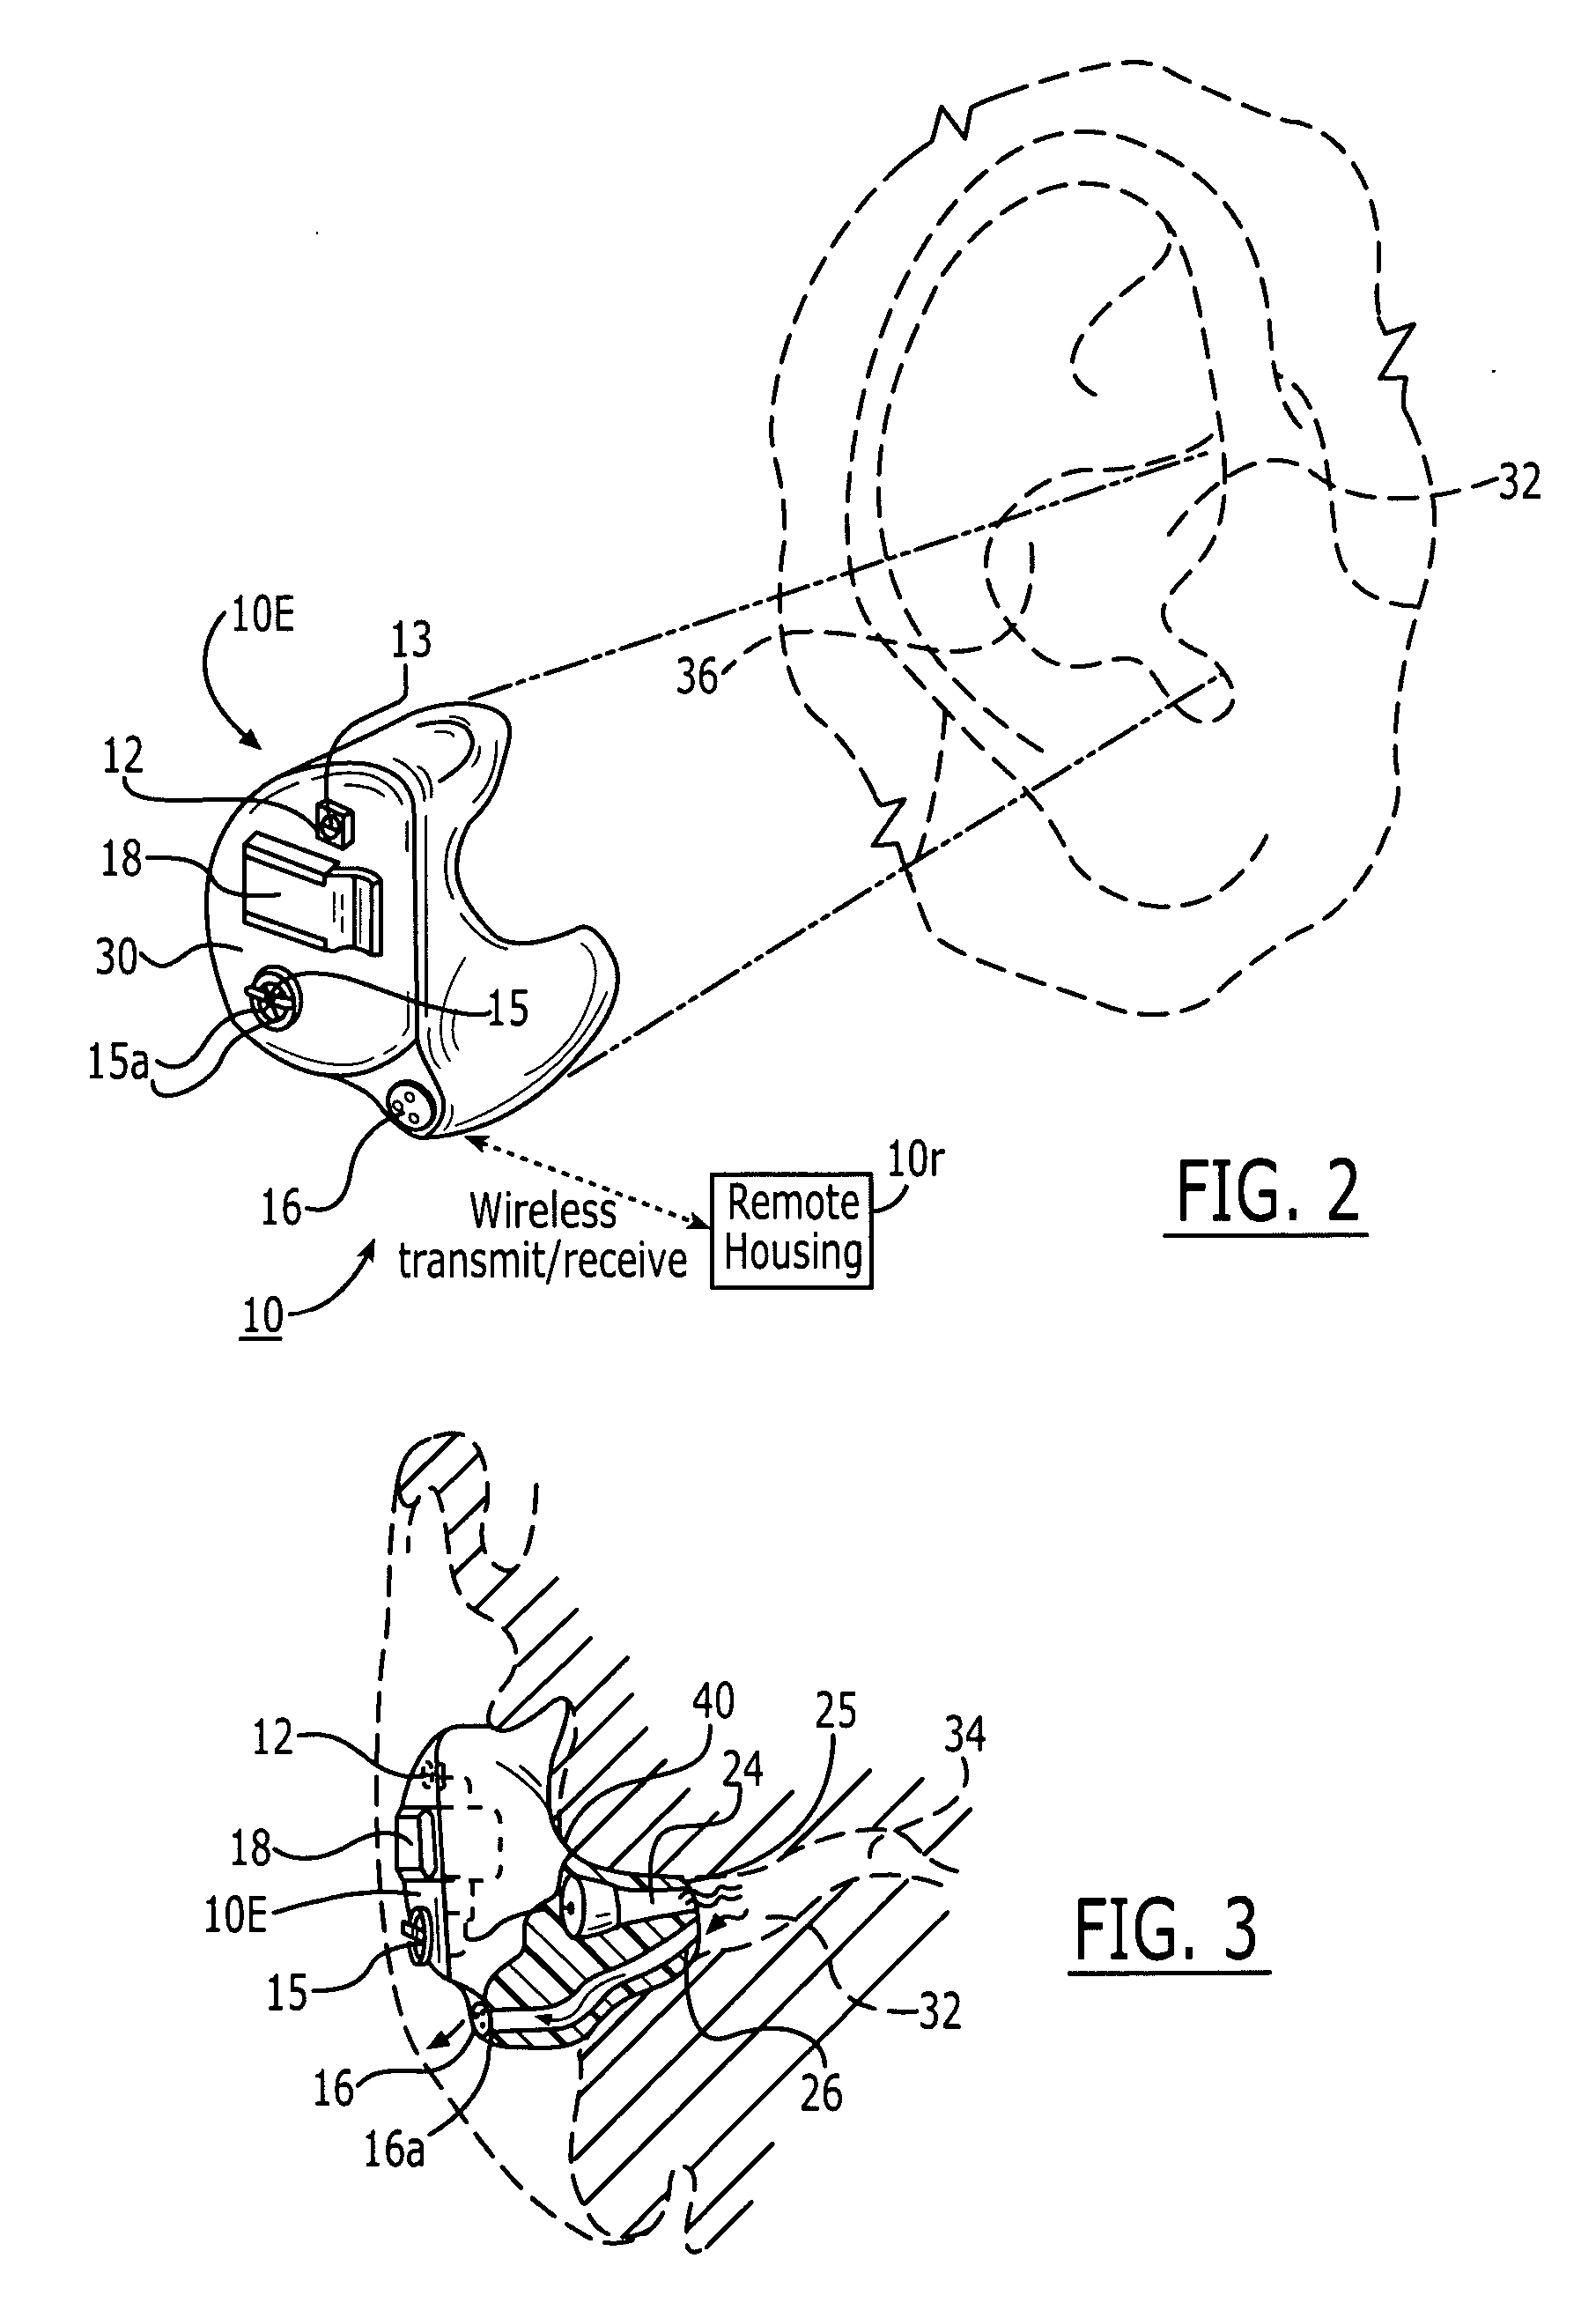 Methods and devices for treating non-stuttering pathologies using frequency altered feedback